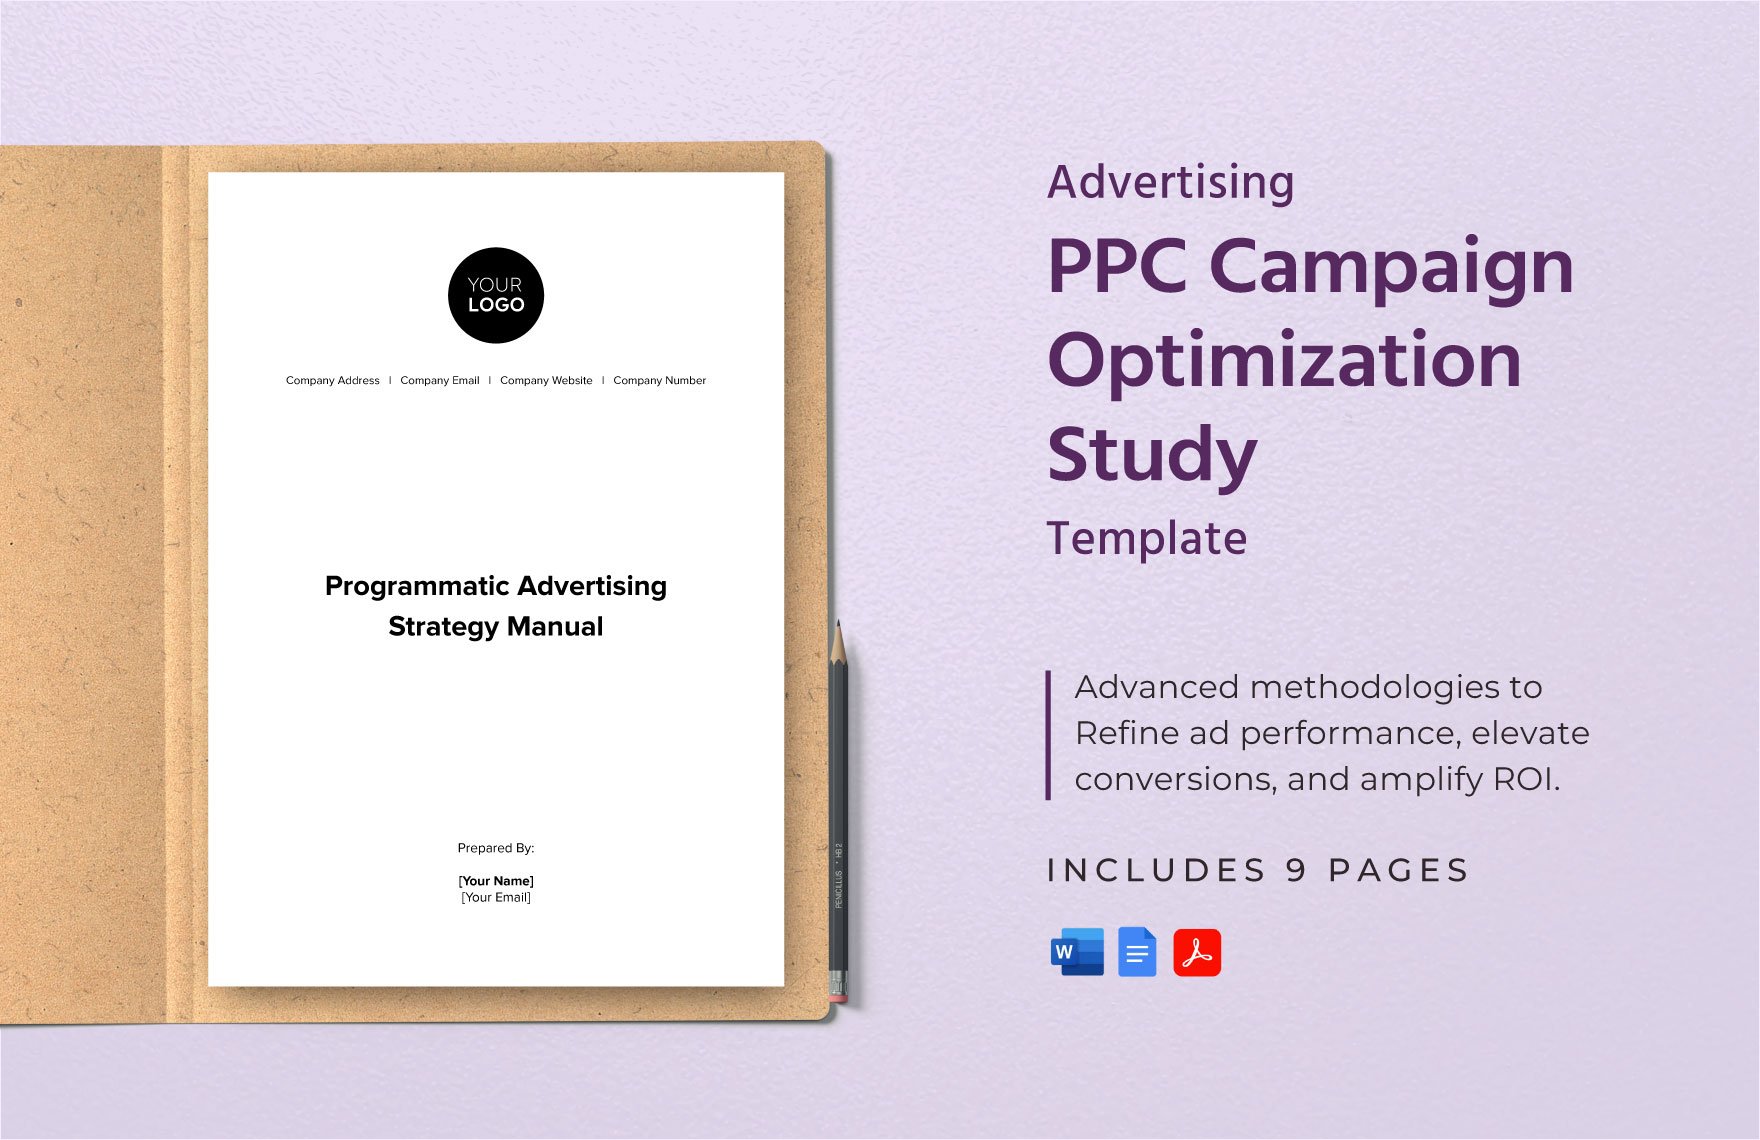 Advertising PPC Campaign Optimization Study Template